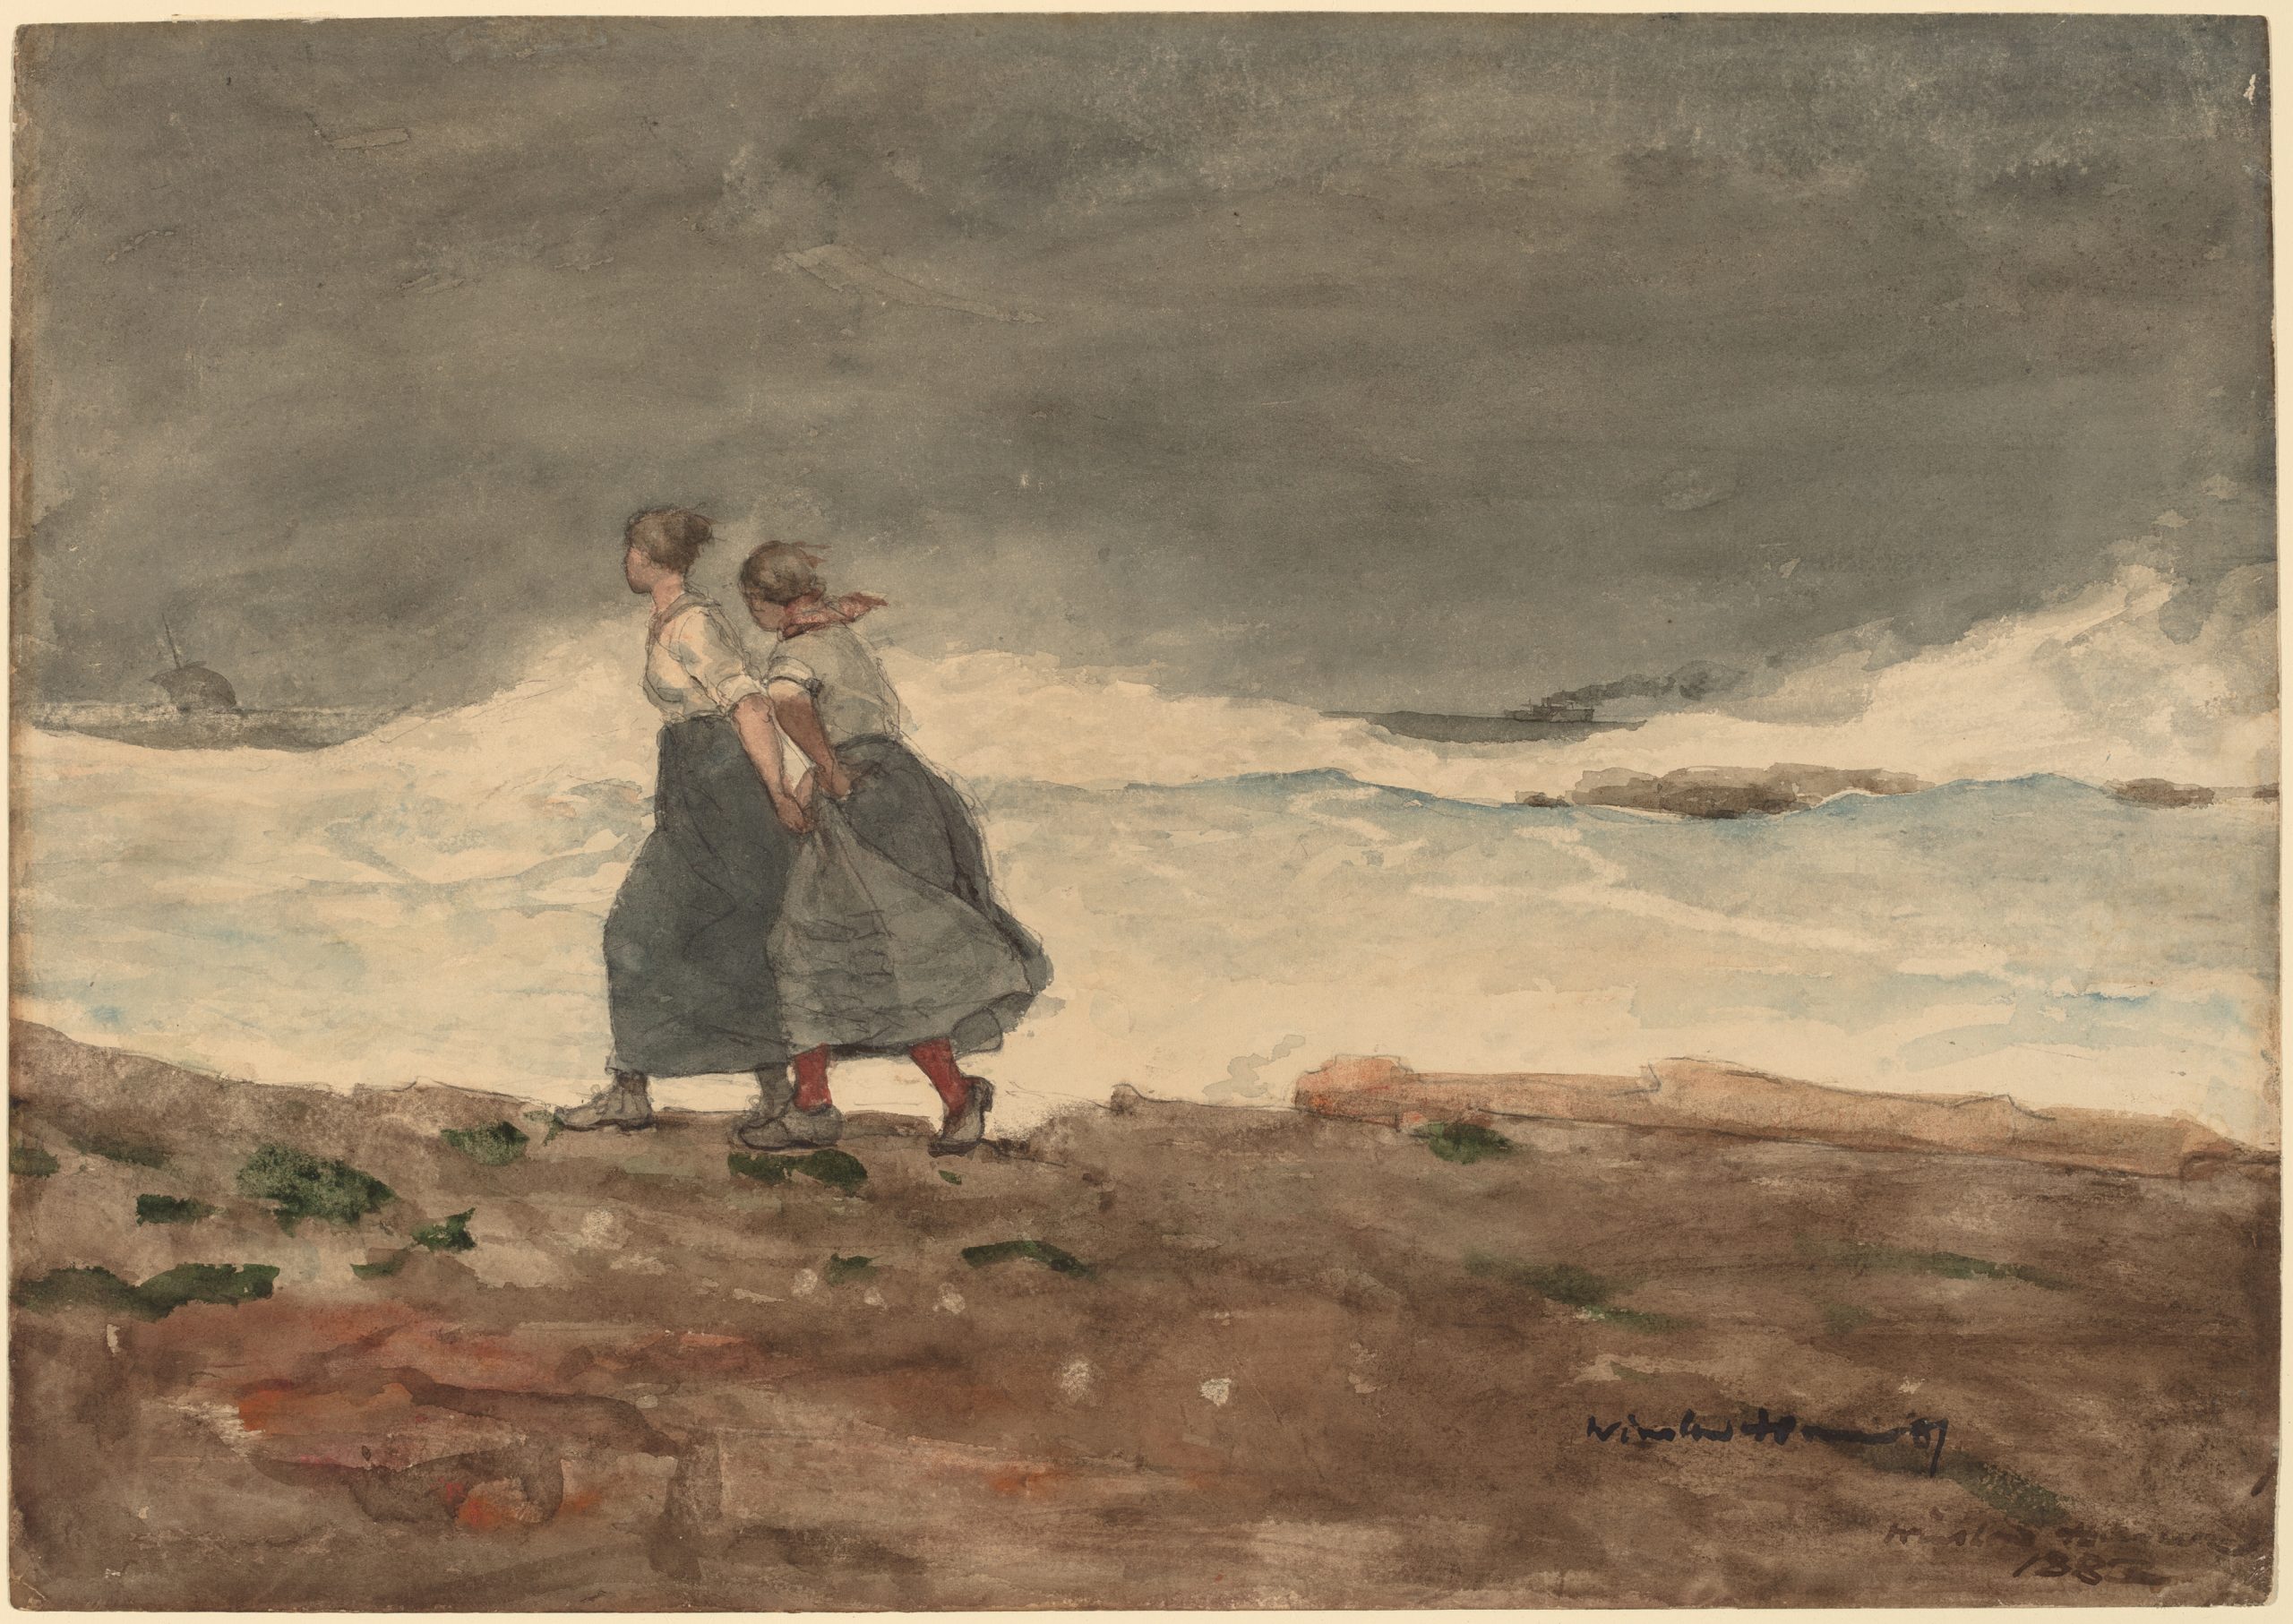 Two women trudging side-by-side through rock-strewn terrain overlooking the ocean